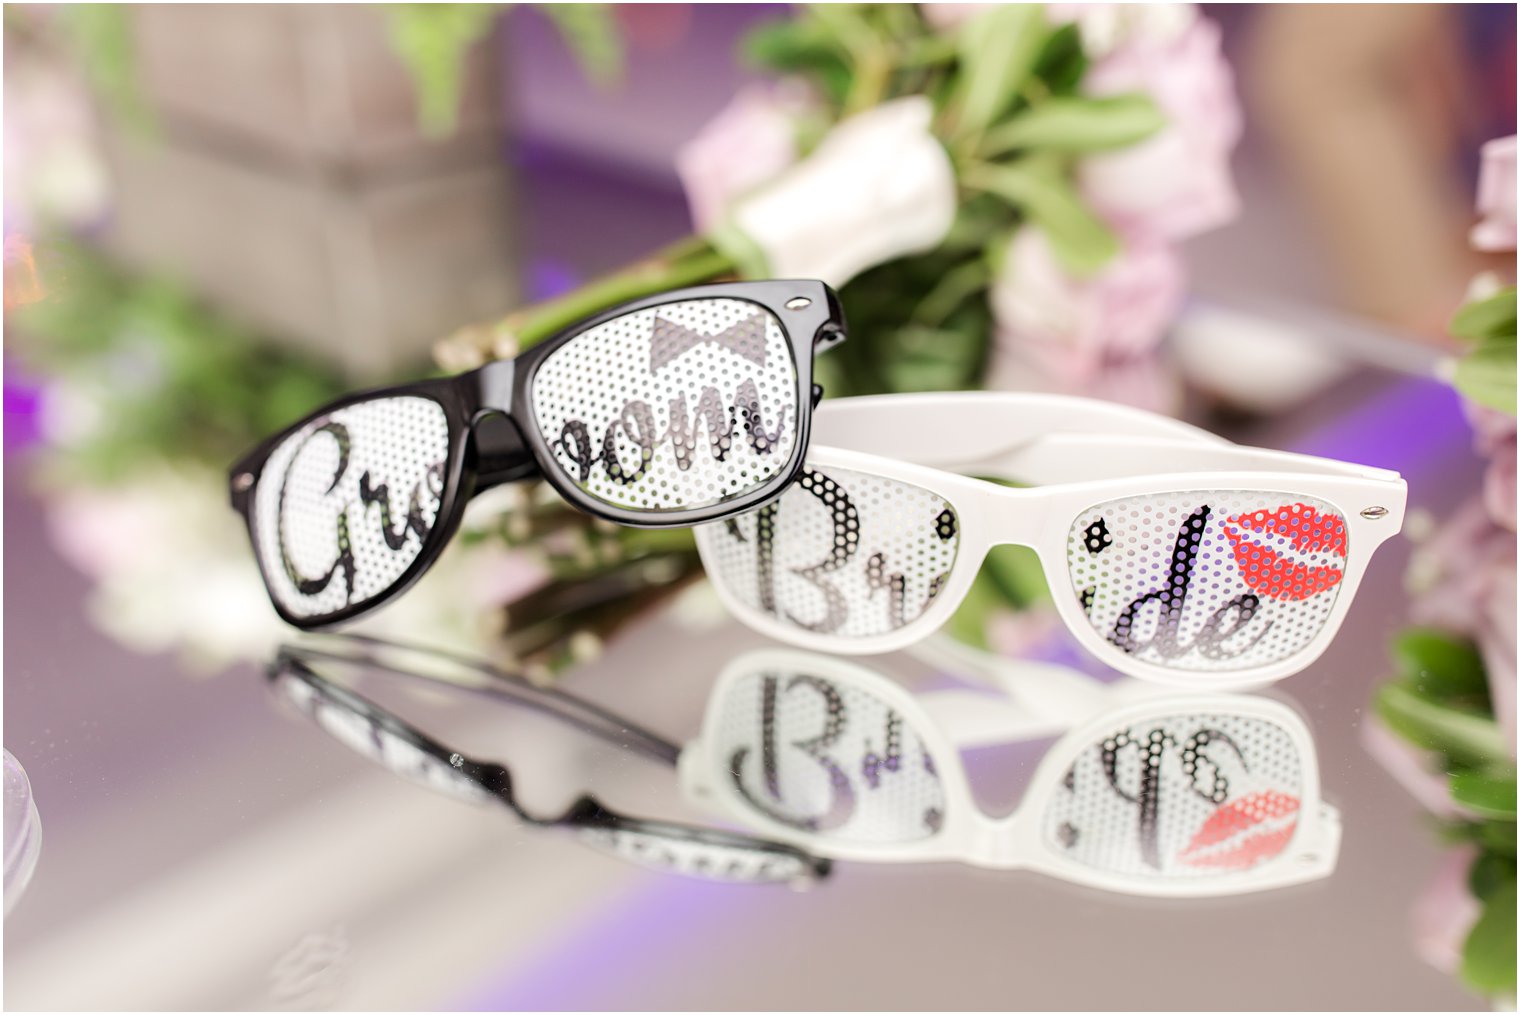 sunglasses with bride and groom on them